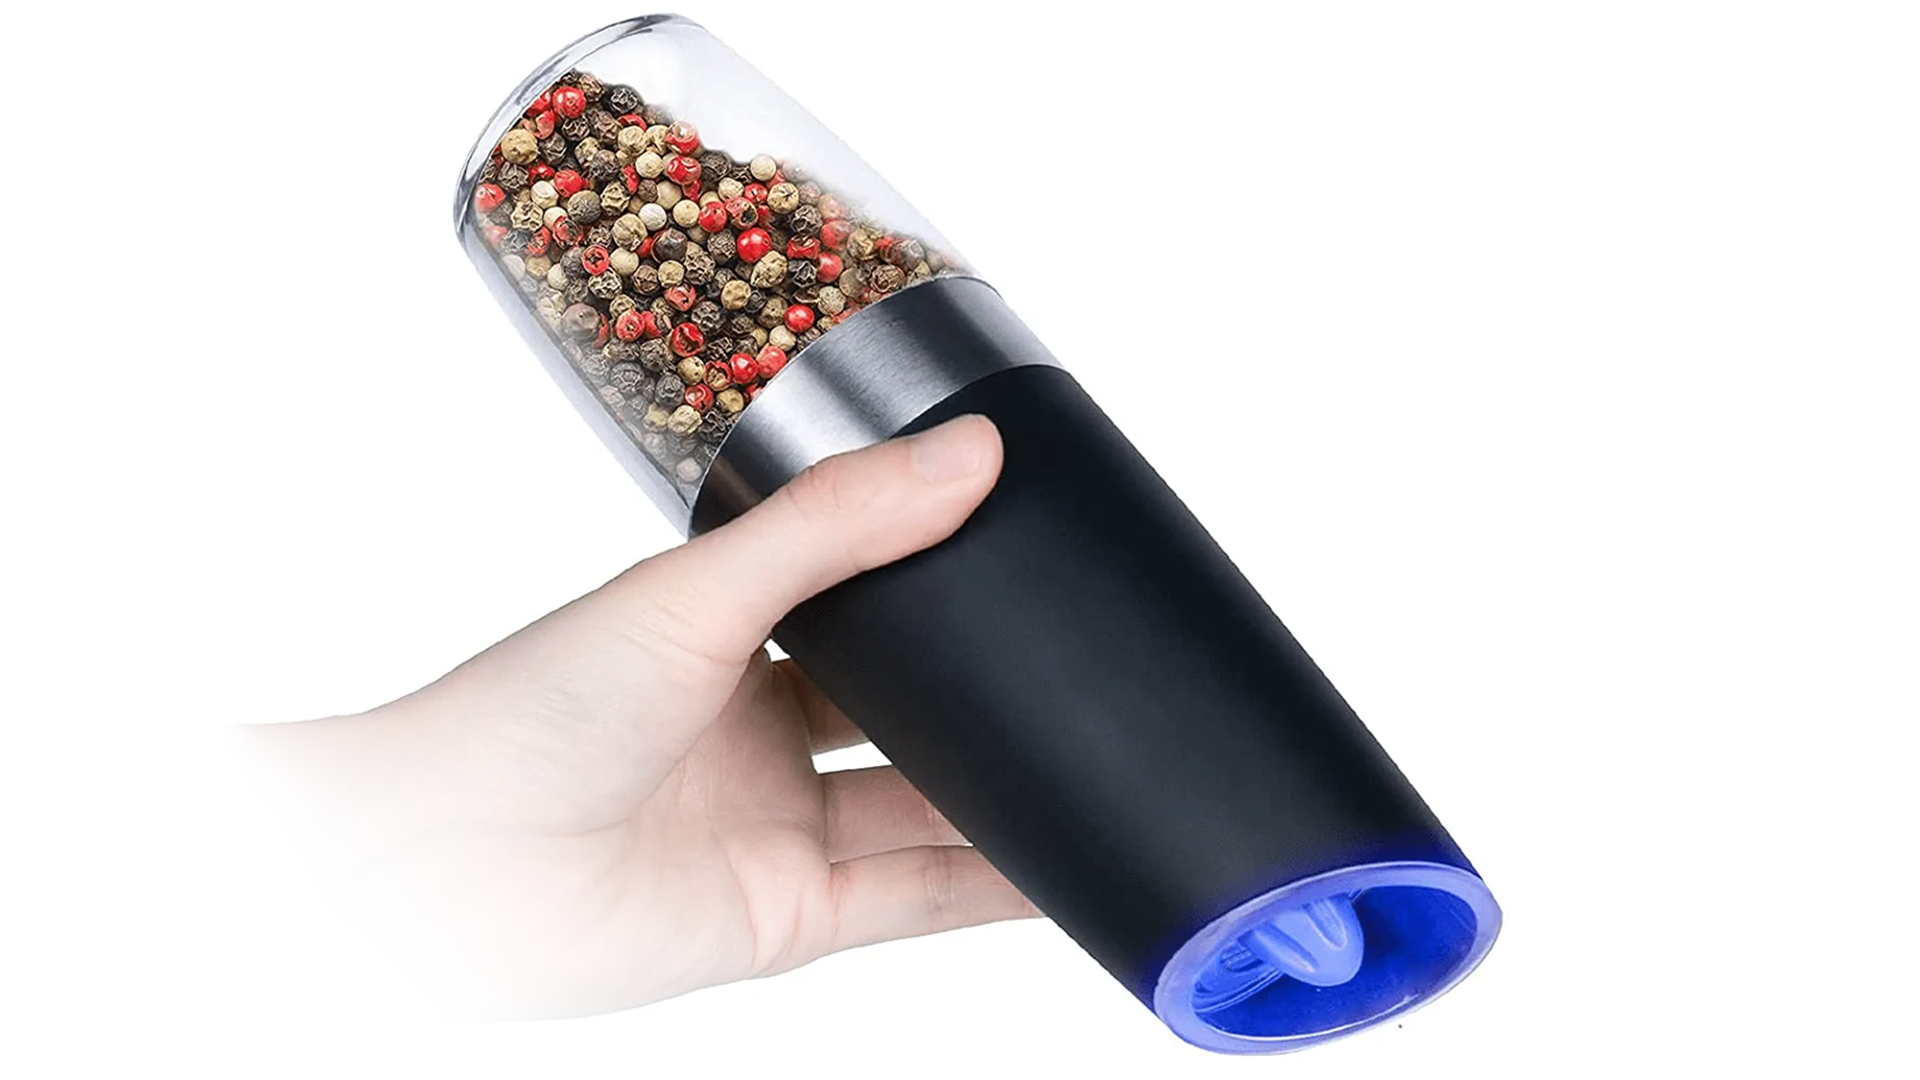 Arigold Automatic Pepper and Salt Mill Grinder